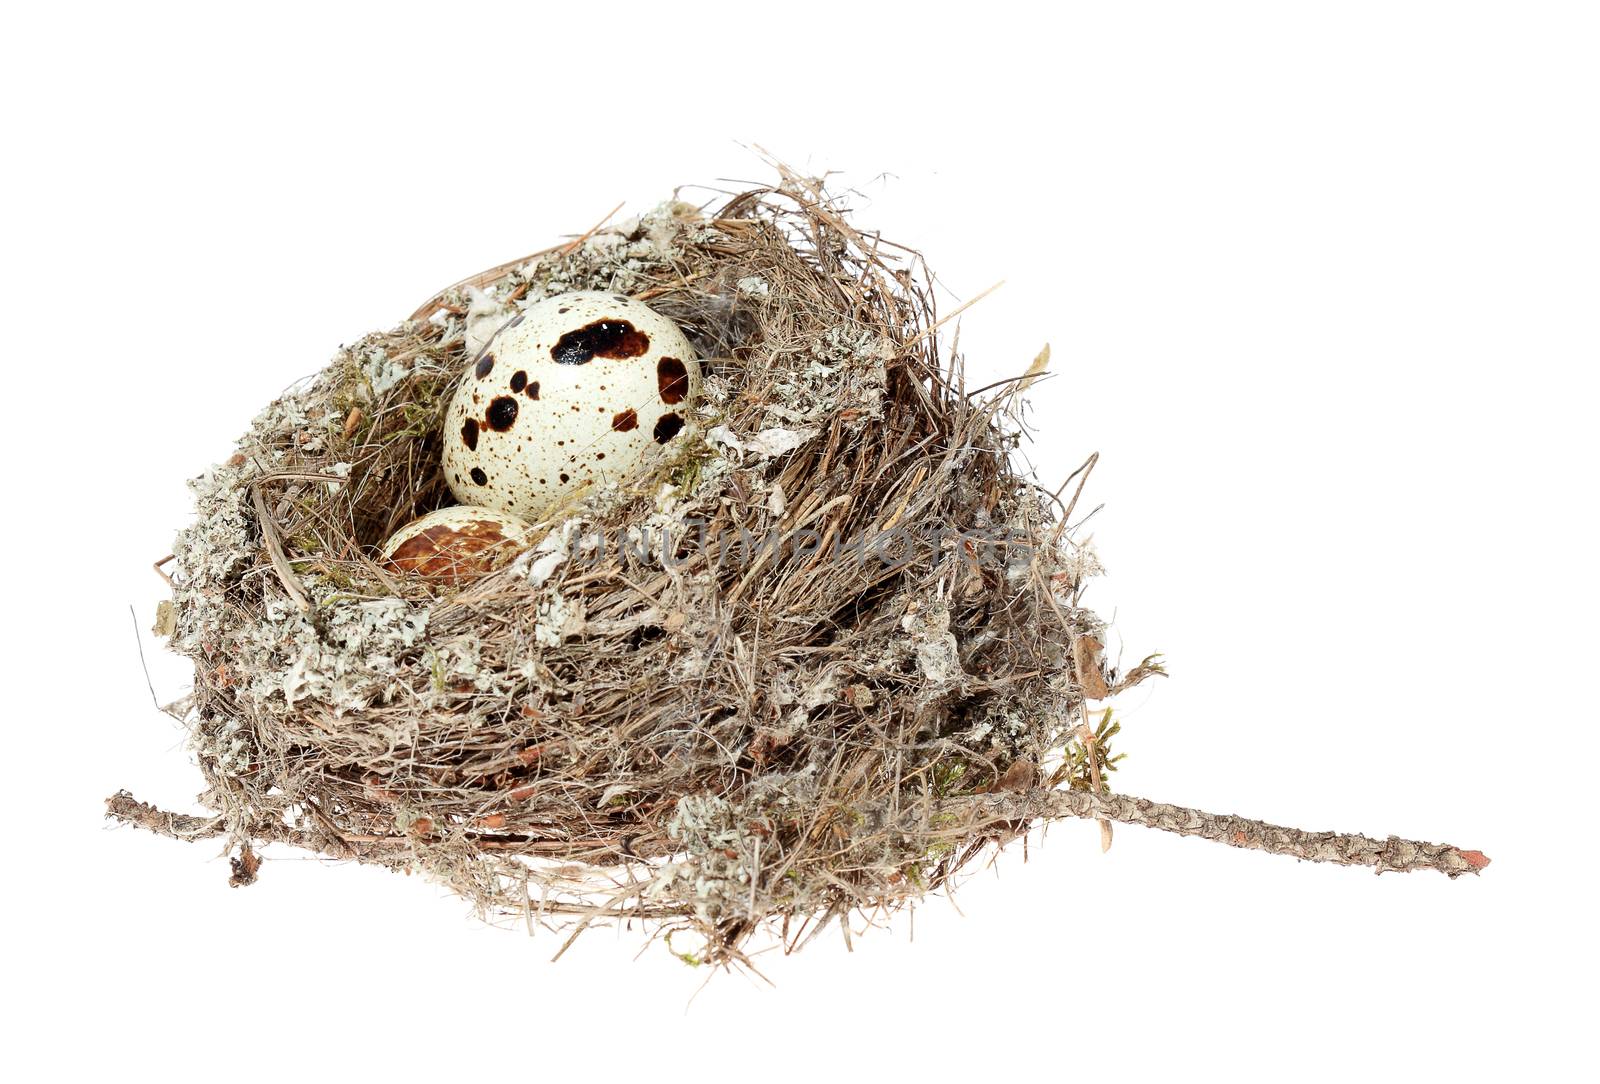 Birds nest with eggs on the white background. (isolated) by aptyp_kok